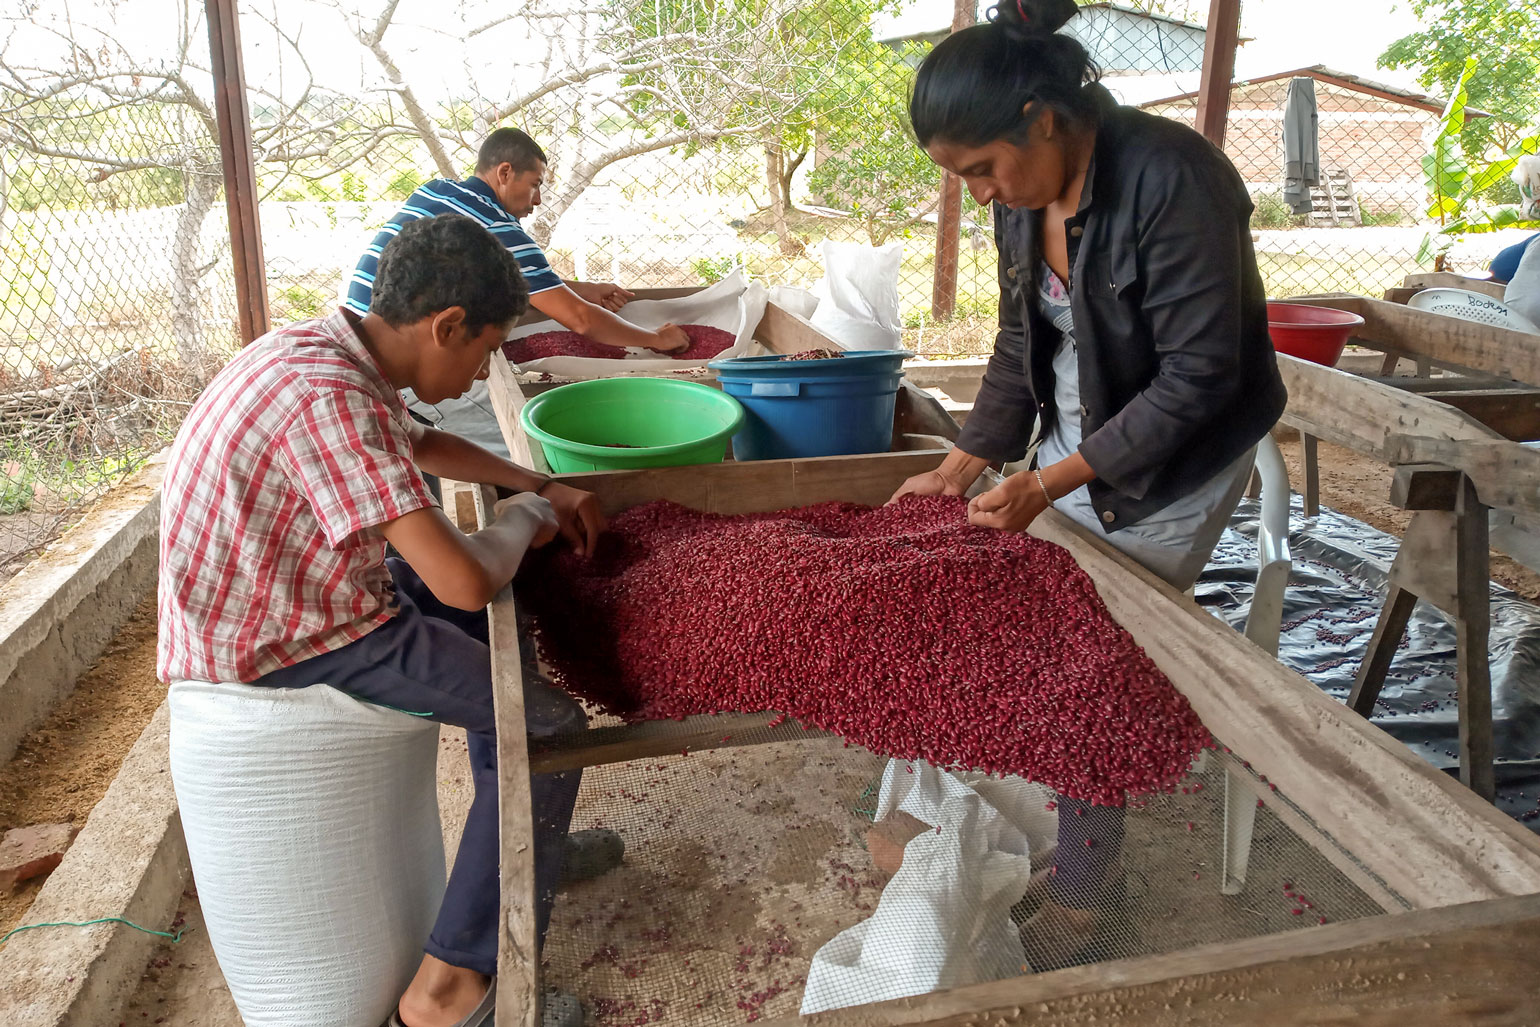 Rural to urban connection is building food sovereignty in Nicaragua - A youth and a young woman are hunched over a table covered in red beans.